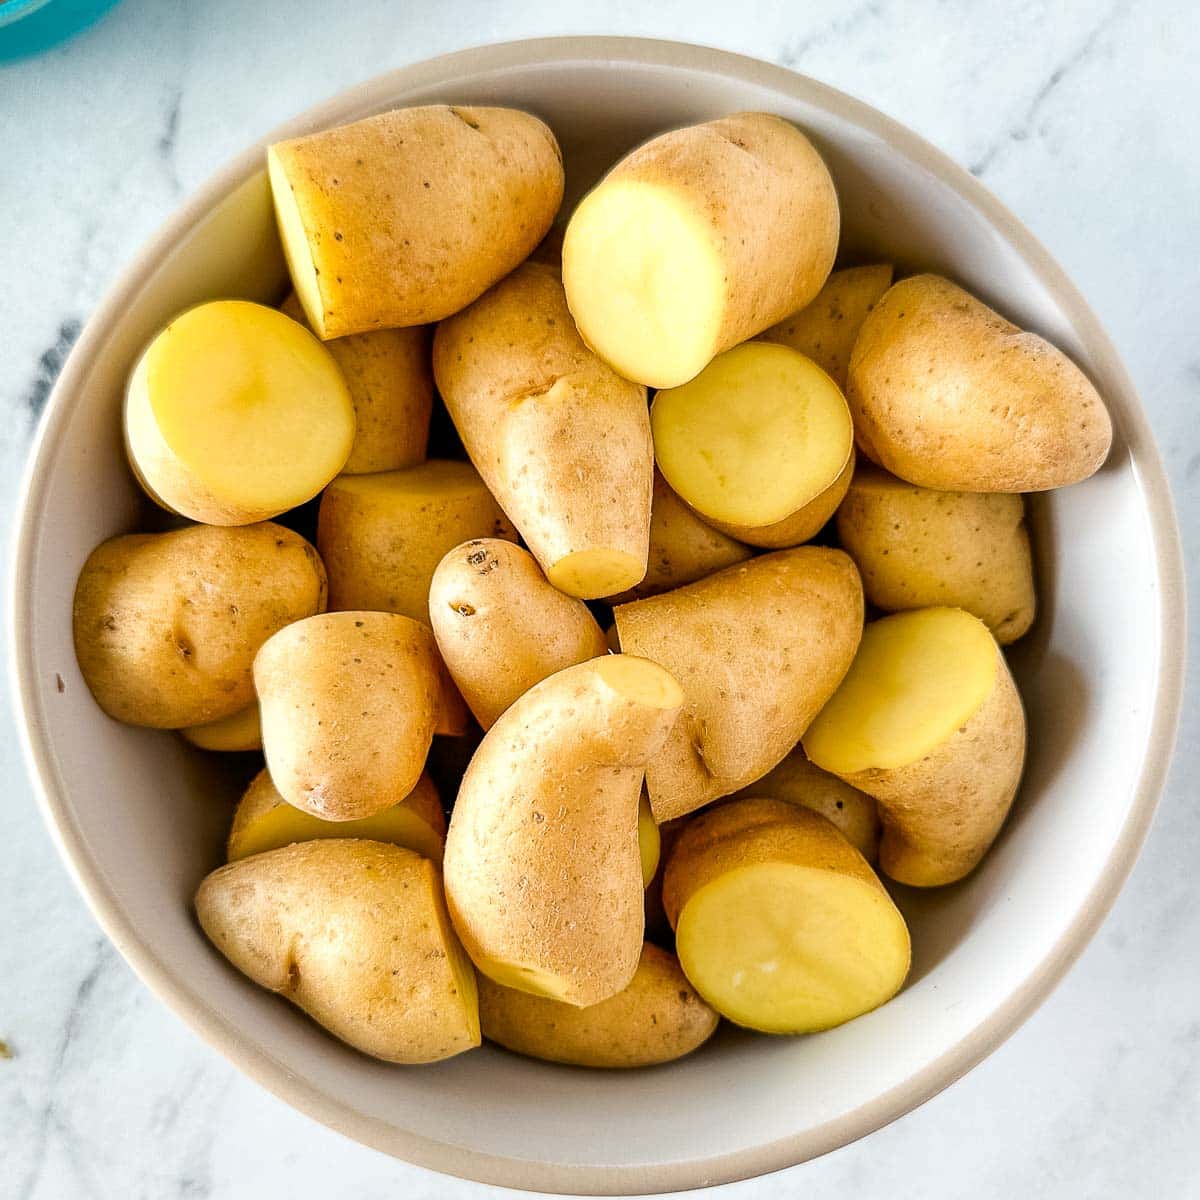 Halved fingerling potatoes in a white bowl.